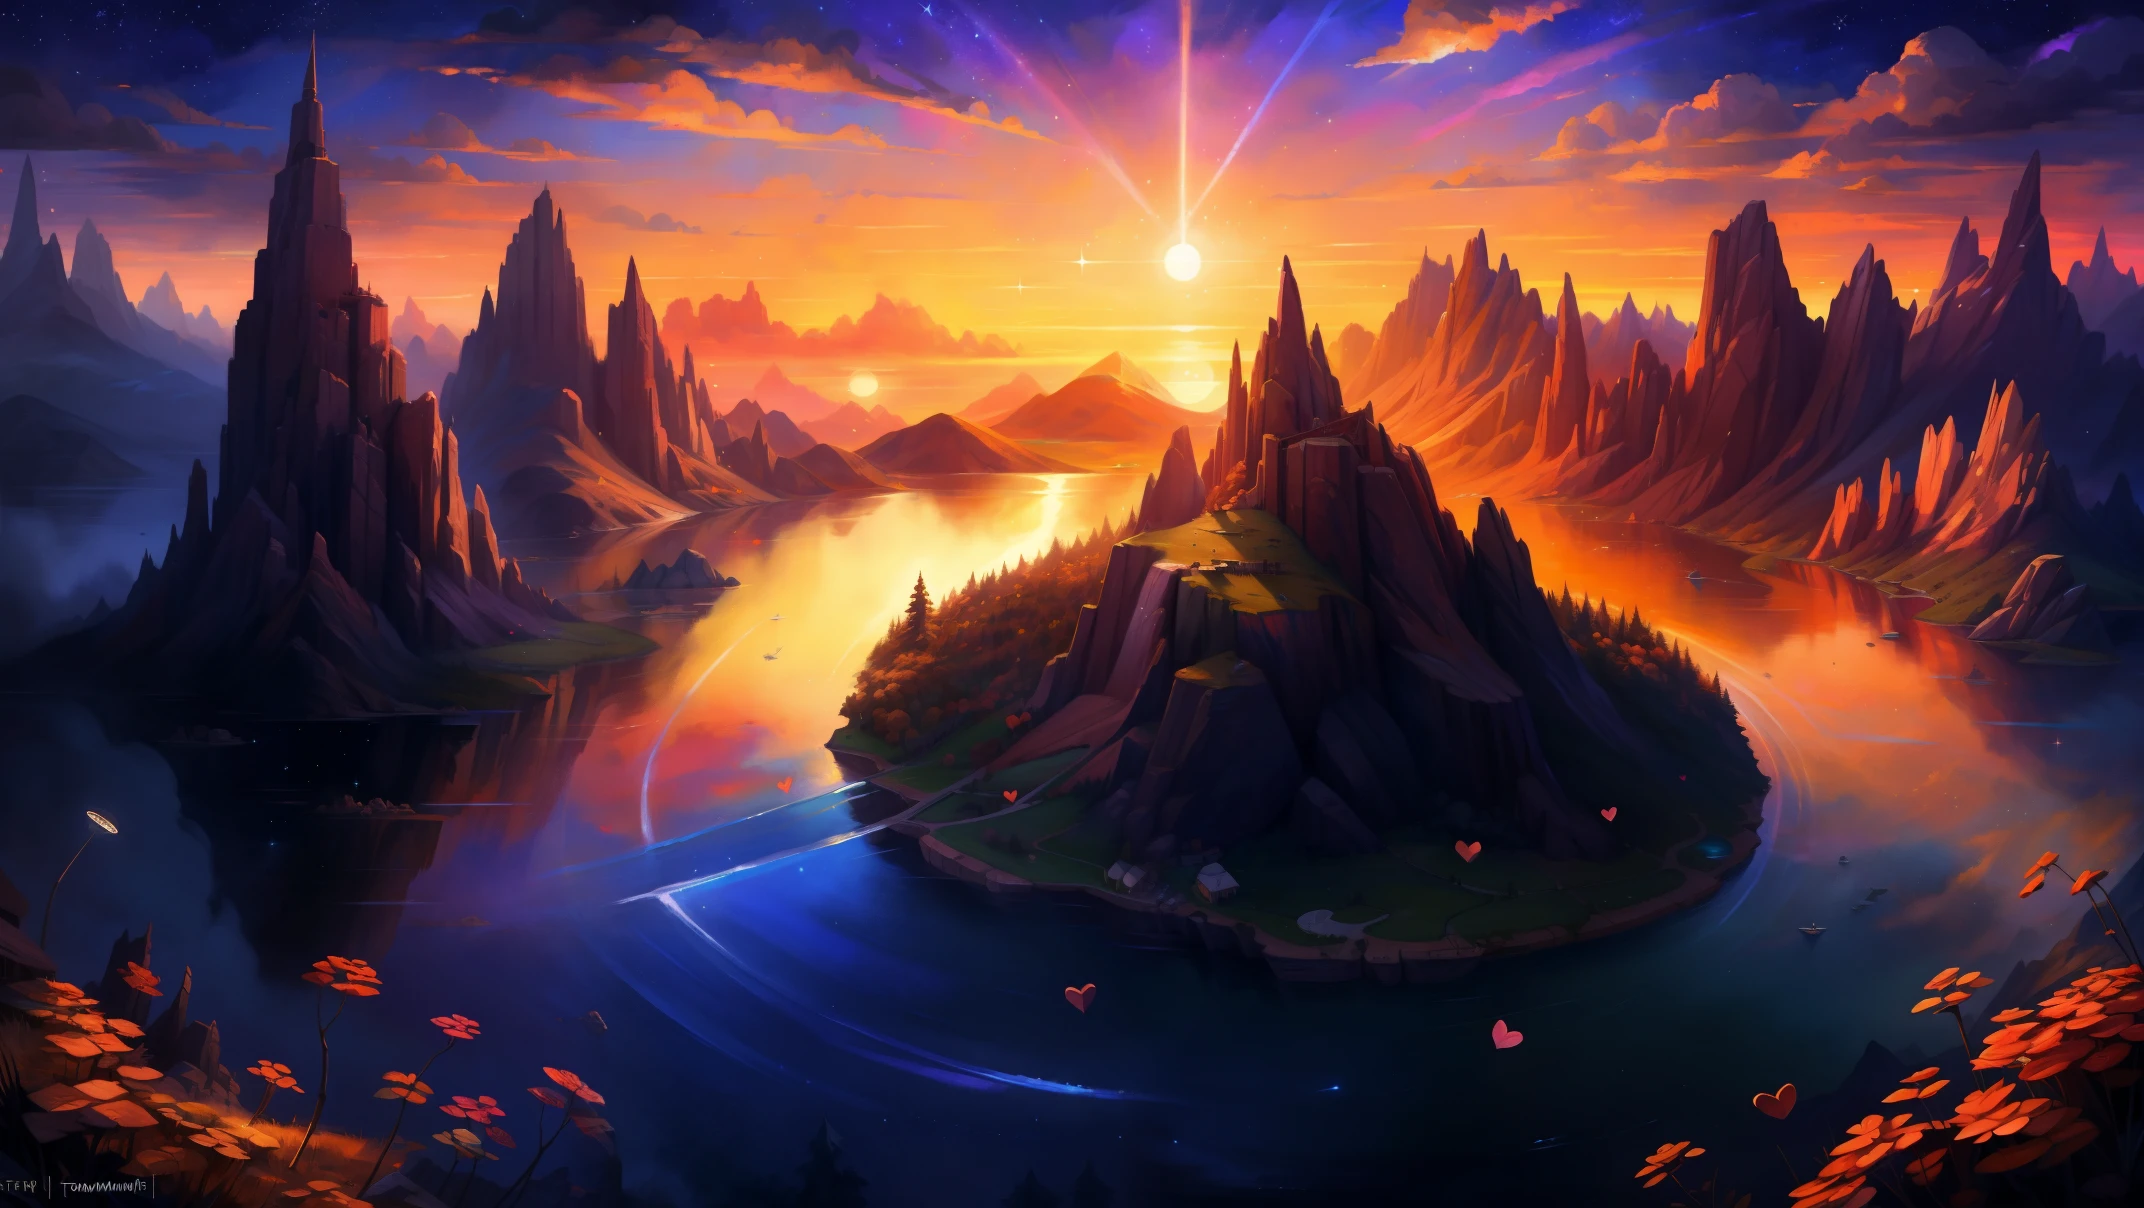 (absurd res), ((ultra high resolution)), (((masterpiece quality))), ((isometric view)), ((breathtaking painstakingly detailed background)), ((impressive lighting)), ((sunset clouds)), ((floating hearts)), ((sparkles)), confetti, sunlight, ⫷|⫸ by foxovh, by SligartheTiger, by cumbread, by gammainks, by seibear, by lollipopcon, by dizzyknight, by greasymojo, by xpray, by roly, by honovy, by taran fiddler, by kenket, by riendonut, by Bayard Wu, by Thomas Benjamin Kennington , by Einshelm, ⫷|⫸ Vast landscape photos，（look from down，Above is the sky，Below are open fields），a girl standing on flower field looking up，（moon full：1.2），（Meteors：0.9），（Starcloud：1.3），Far Mountain, Tree BREAK making art，（Warm light source：1.2），（glowworm：1.2），lamp lights，lots of purples and oranges，intricately details，Volumetric lighting BREAK（tmasterpiece：1.2），（best qualtiy），4K，ultra - detailed，（dynamic compositions：1.4），Plenty of detail，plethora of colors，（Irridescent color：1.2），（with light glowing，Atmospheric lighting），dream magical，magical，（solo：1.2 💥⭕💯💠☾•☾•☾•☾•☾•☾•☾•☾•☾•☾•- INCREDIBLE LANDSCAPE •☾• (absurd res), ((ultra high resolution)), (((masterpiece quality))), ((isometric view)), ((breathtaking painstakingly detailed background)), ((impressive lighting)), ((sunset clouds)), ((floating hearts)), ((sparkles)), confetti, sunlight, ⫷|⫸ by foxovh, by SligartheTiger, by cumbread, by gammainks, by seibear, by lollipopcon, by dizzyknight, by greasymojo, by xpray, by roly, by honovy, by taran fiddler, by kenket, by riendonut, by Bayard Wu, by Thomas Benjamin Kennington , by Einshelm, ⫷|⫸ scenery of a star shining in the sky over a body of water, cosmic skies. by makoto shinkai, makoto shinkai cyril rolando, makoto shinkai. —h 2160, ( ( makoto shinkai ) ), style of makoto shinkai, makoto shinkai!, by Makoto Shinkai, by makoto shinkai
